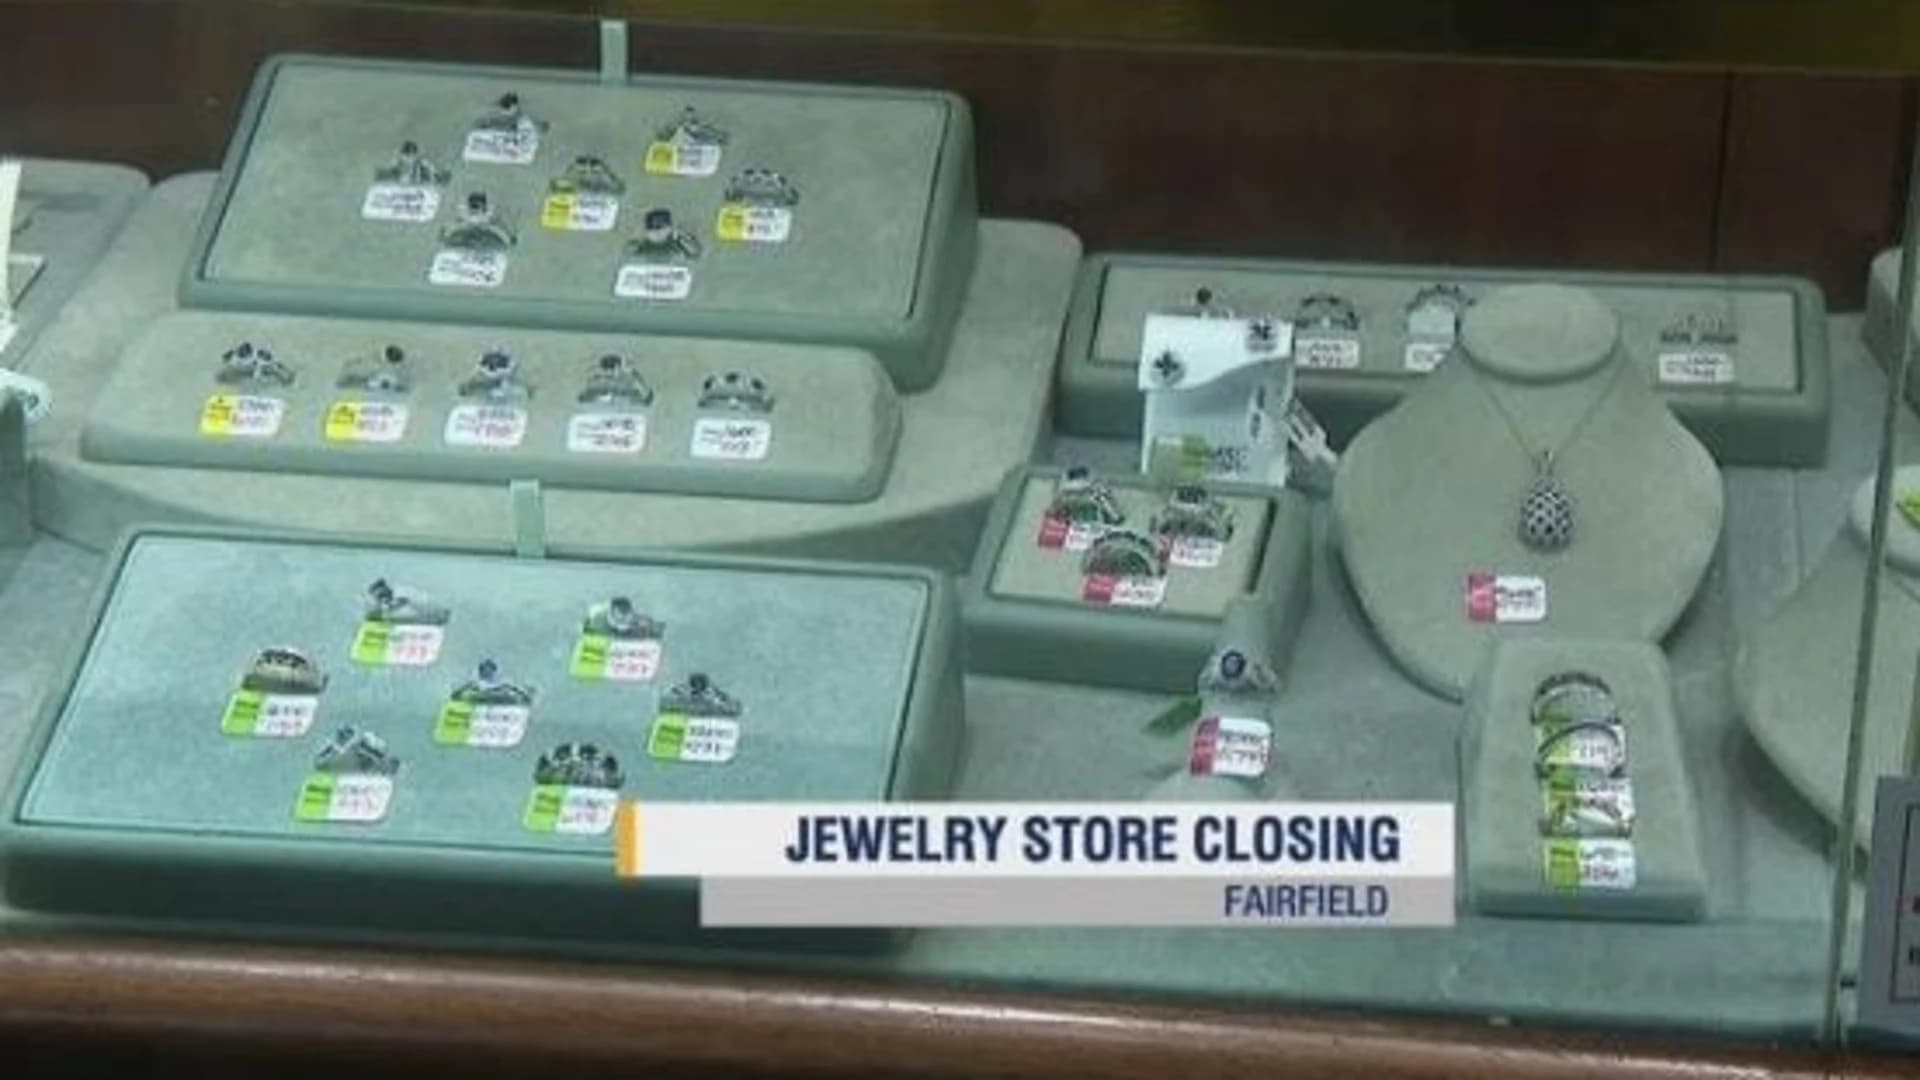 Fairfield jeweler in business for over 100 years is closing